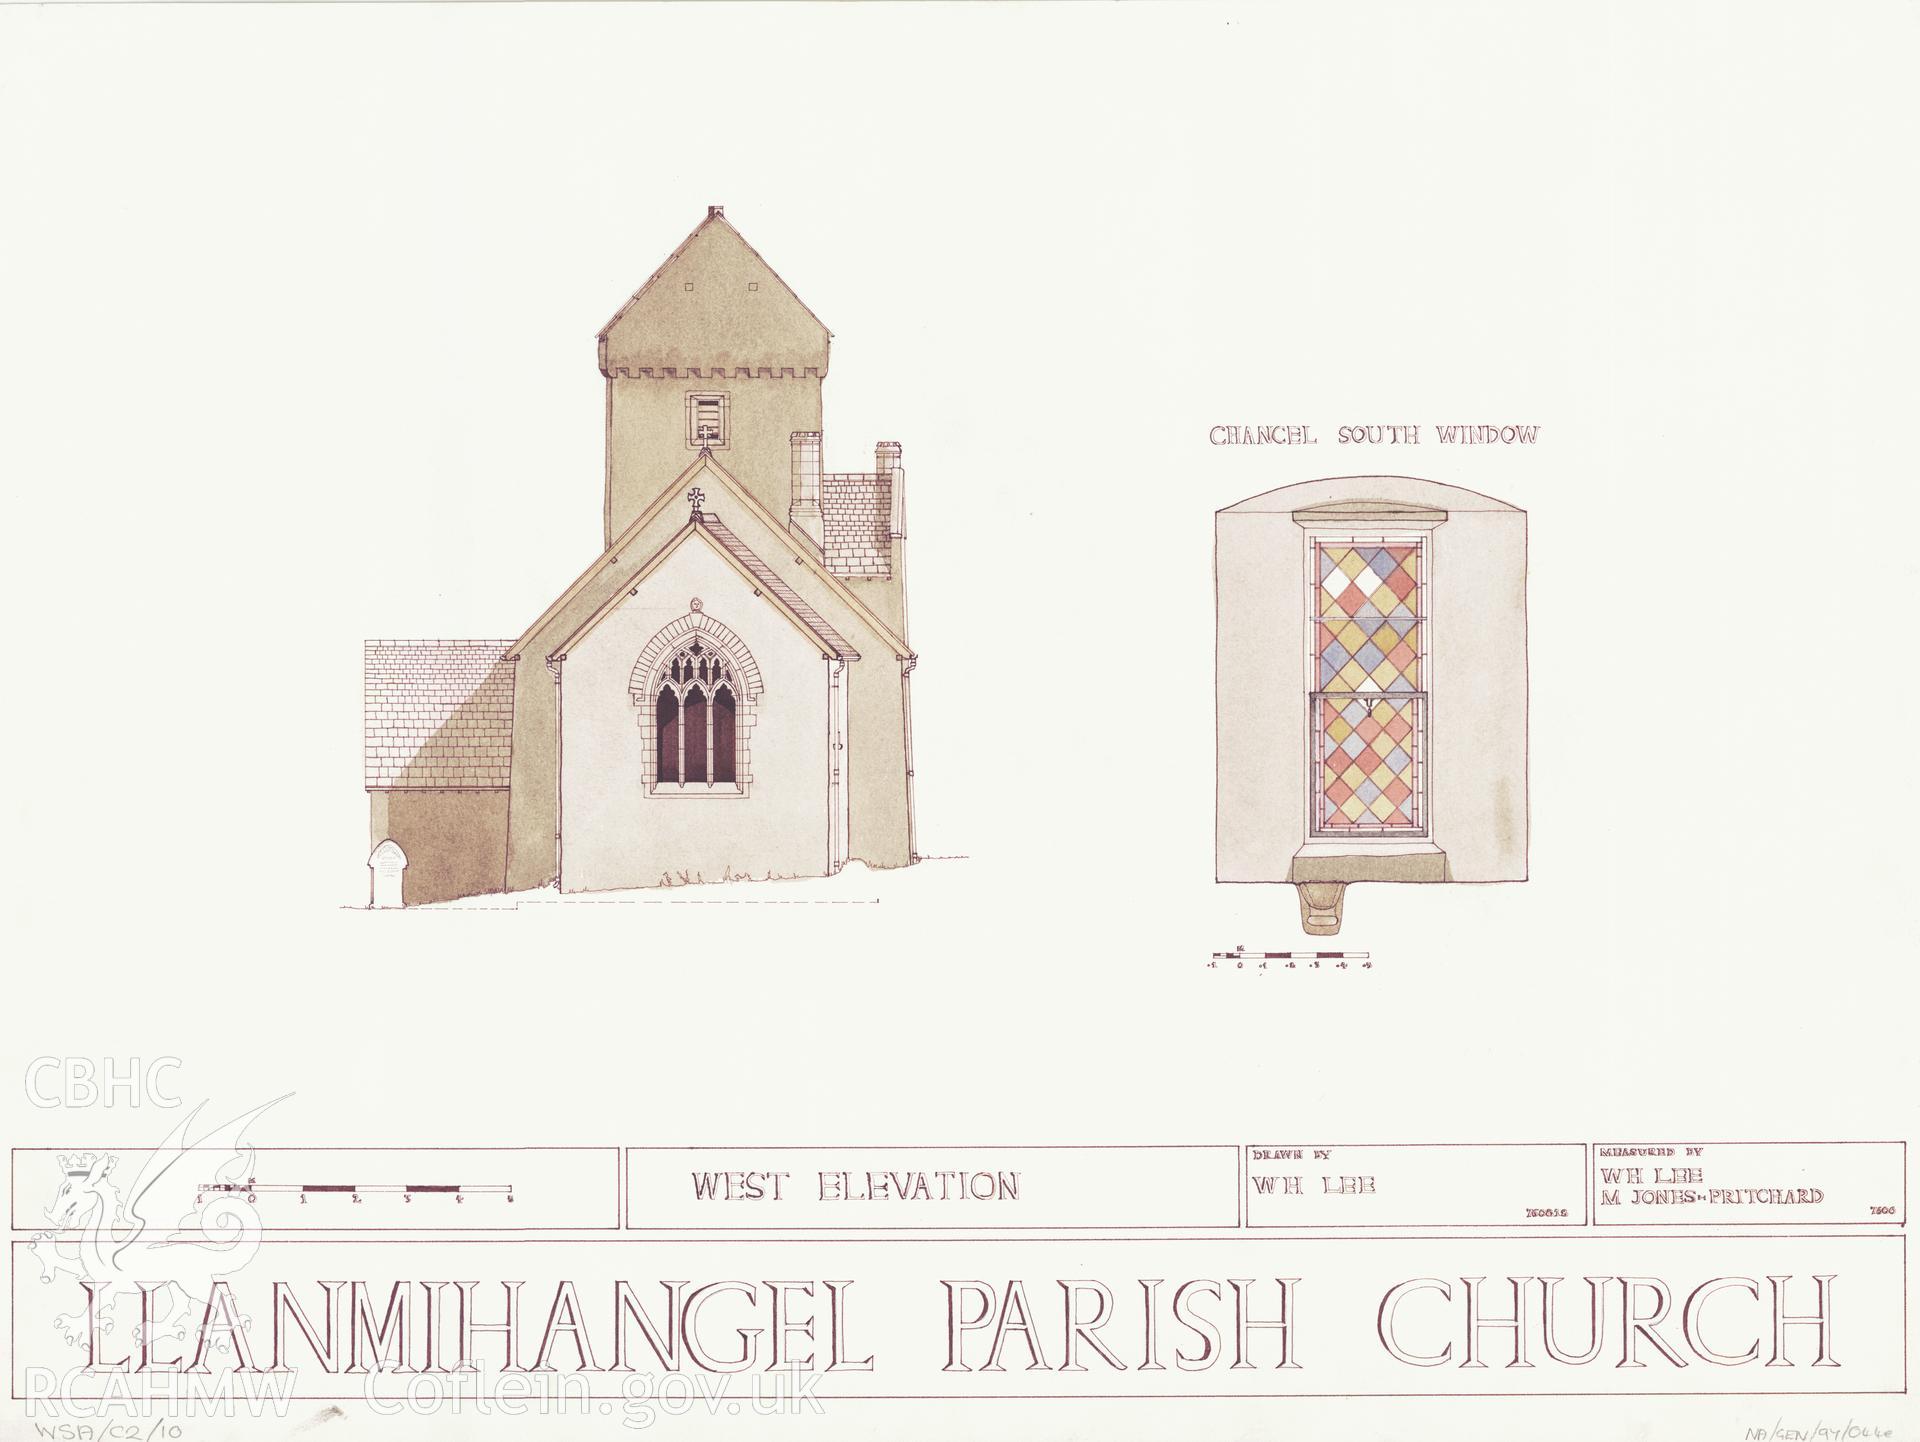 Measured drawing showing detail of the chancel south window and west elevation of Llanmihangel Parish Church, produced by M. Jones-Pritchard and W.H. Lee, 1976.